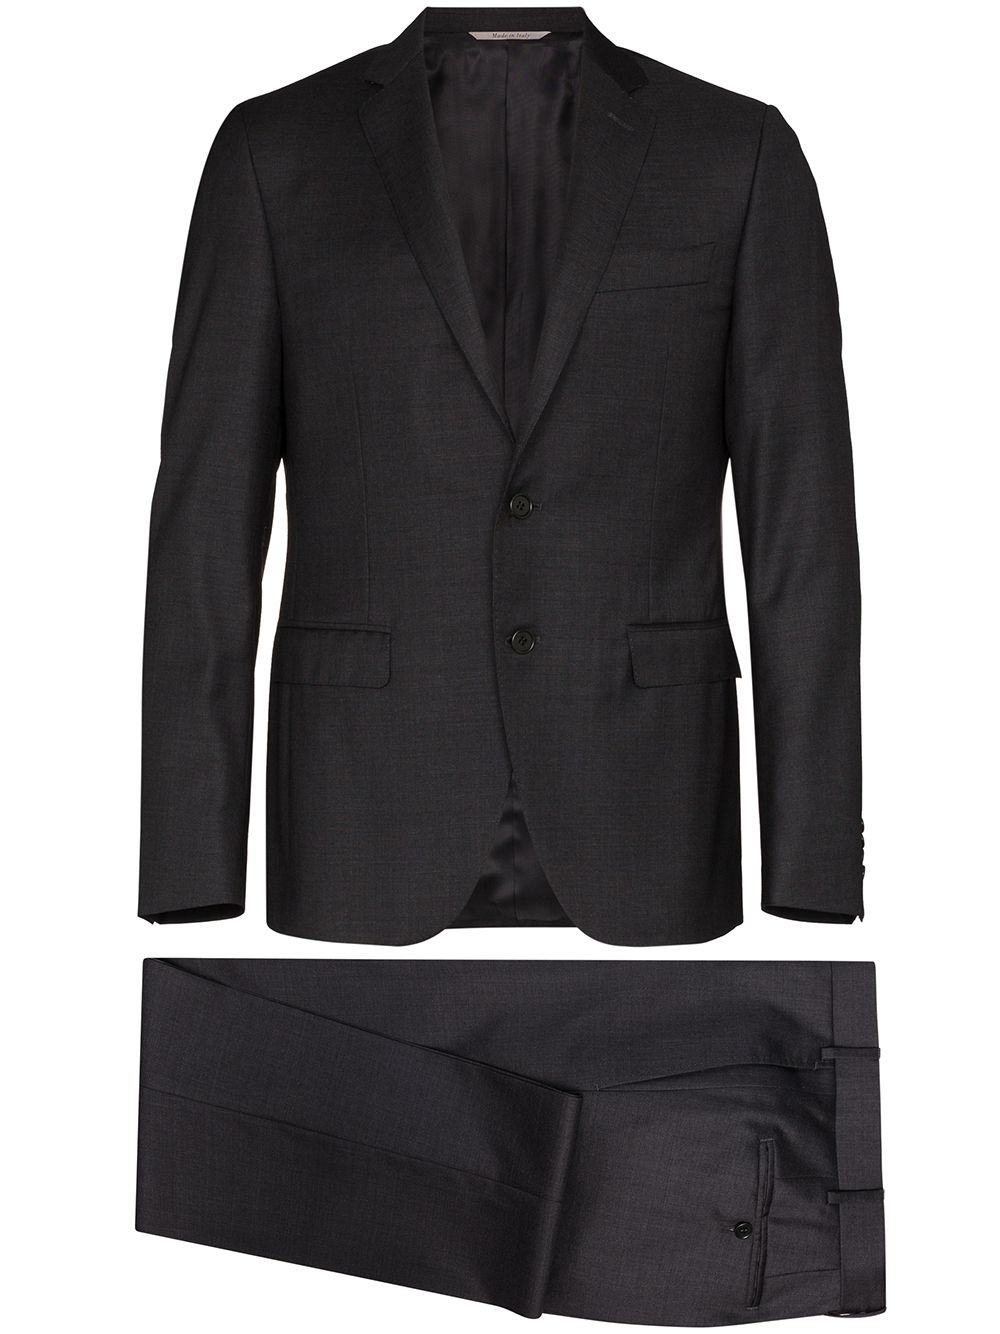 CANALI TAILORED FORMAL WOOL SUIT